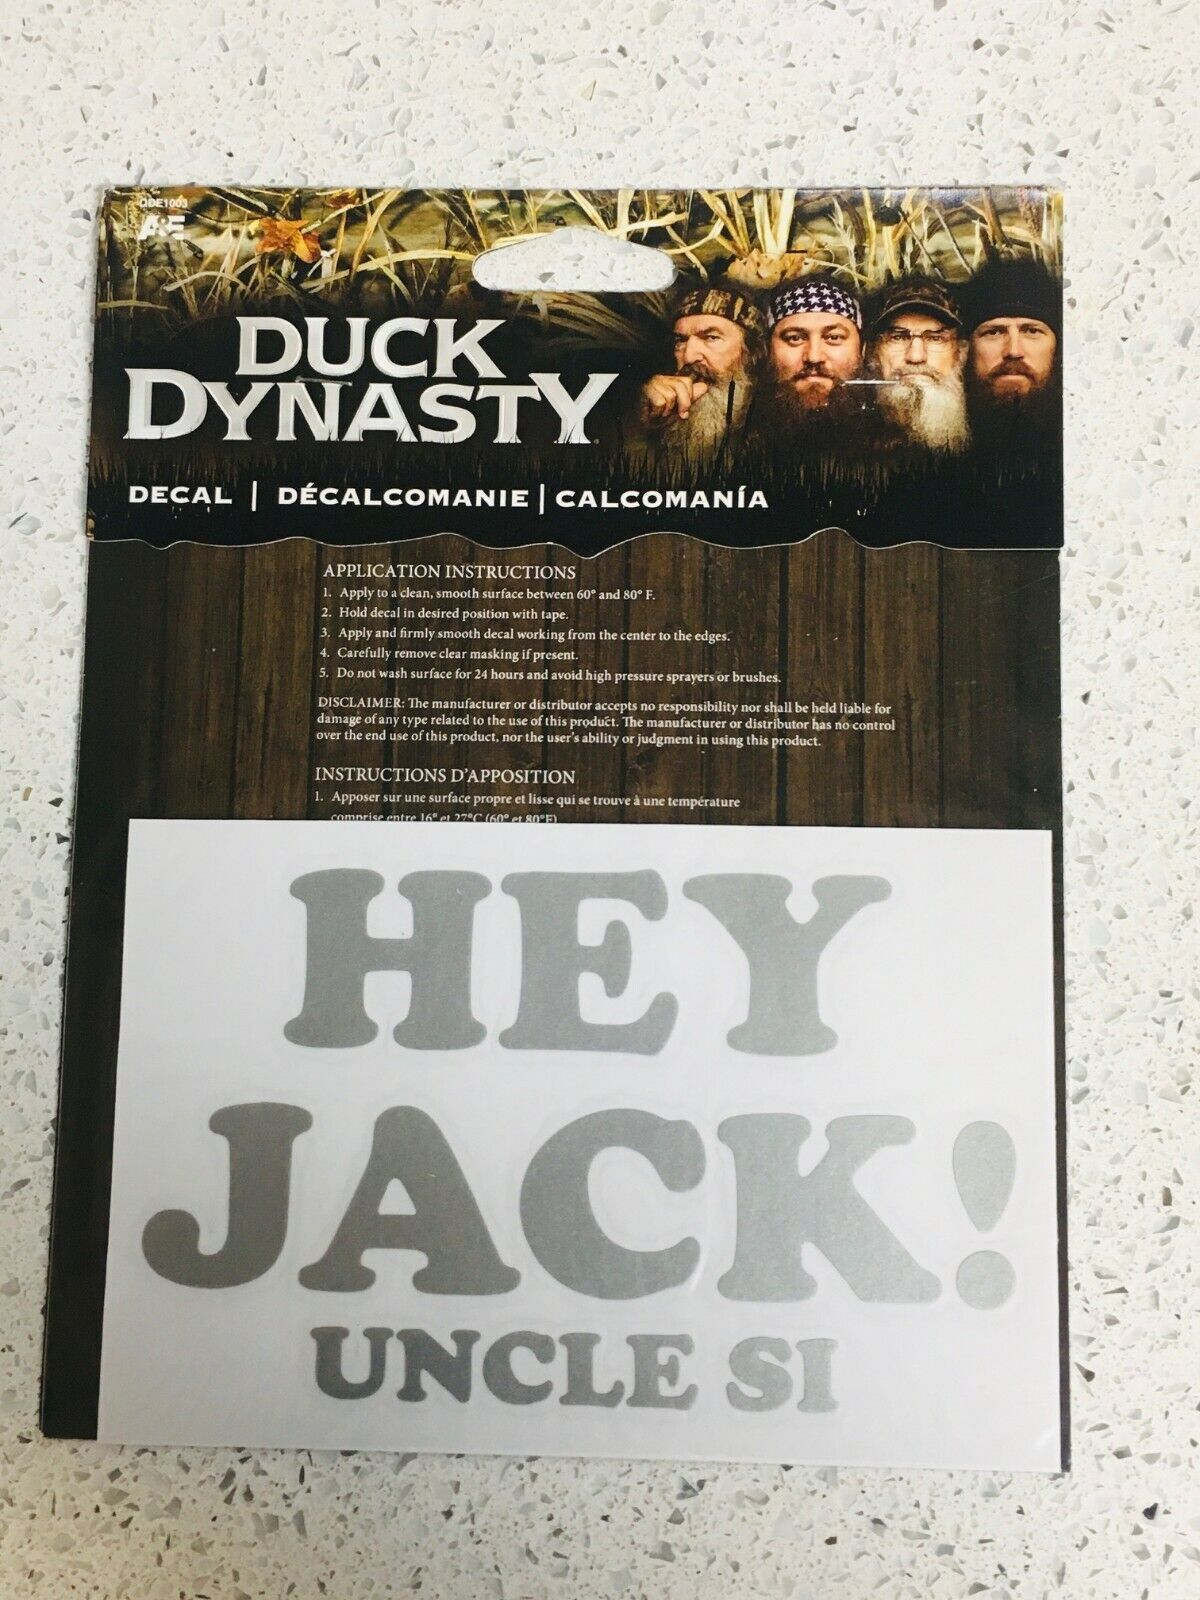 Duck Dynasty Commander Auto Car Sticker Decal Hey Jack Uncle Si